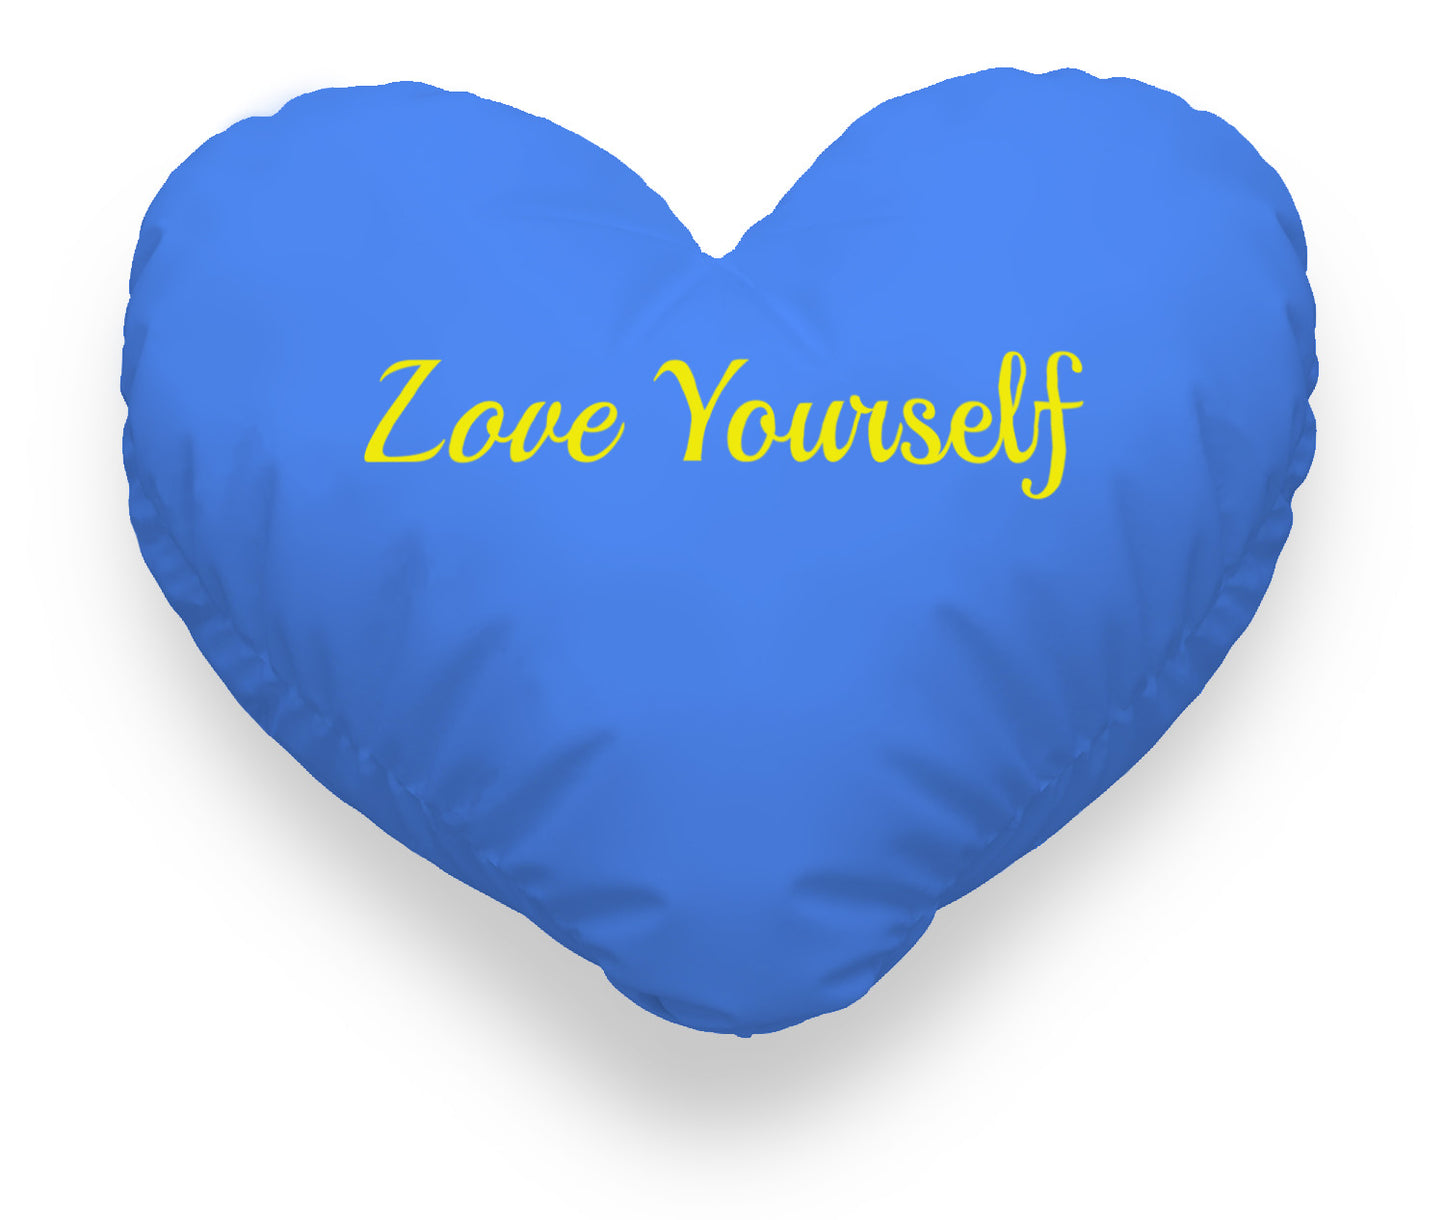 blue heart cushion. yellow text "love yourself".